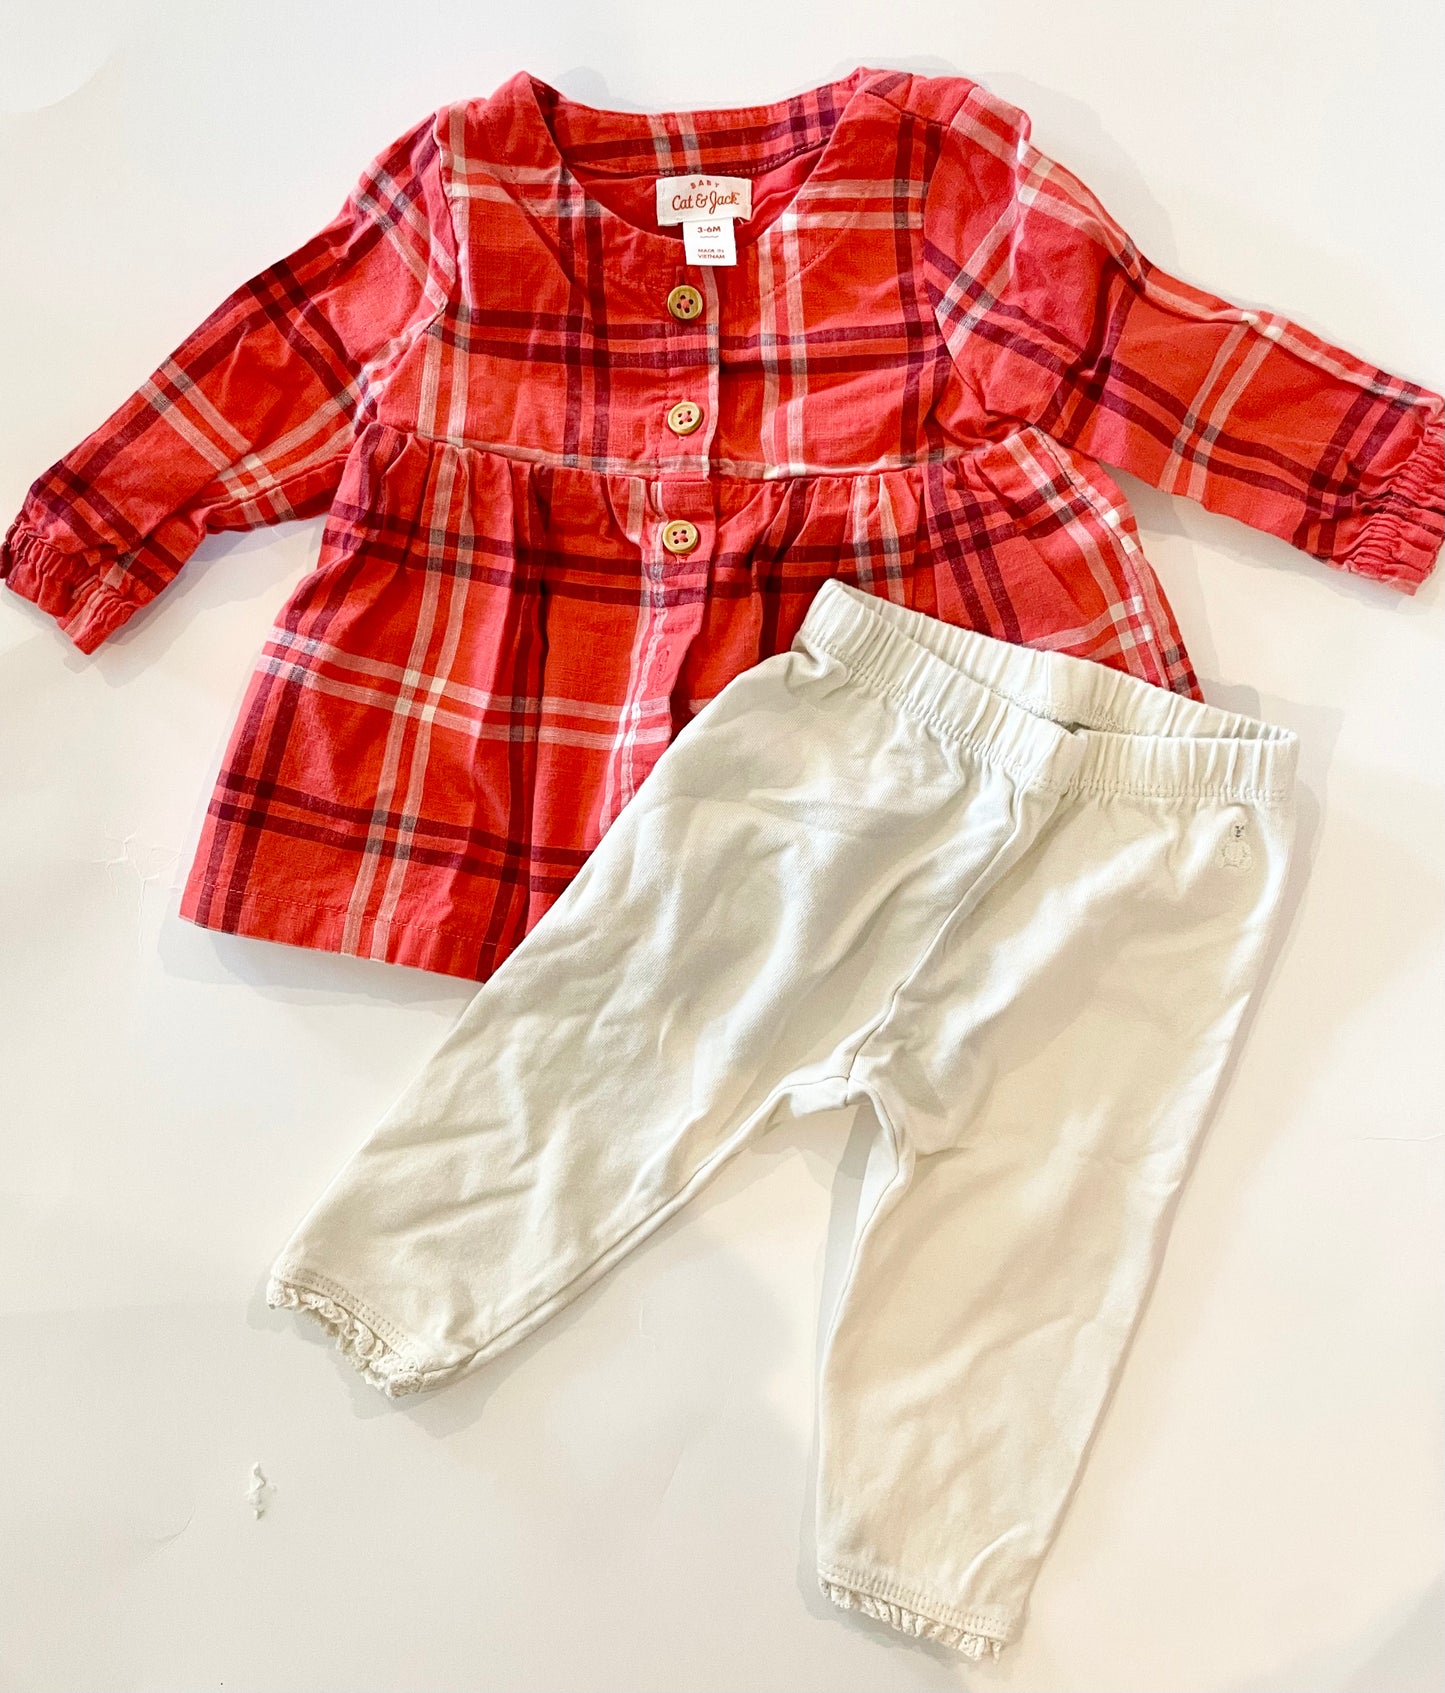 Cat and jack plaid dress and gap white pants size 6 months